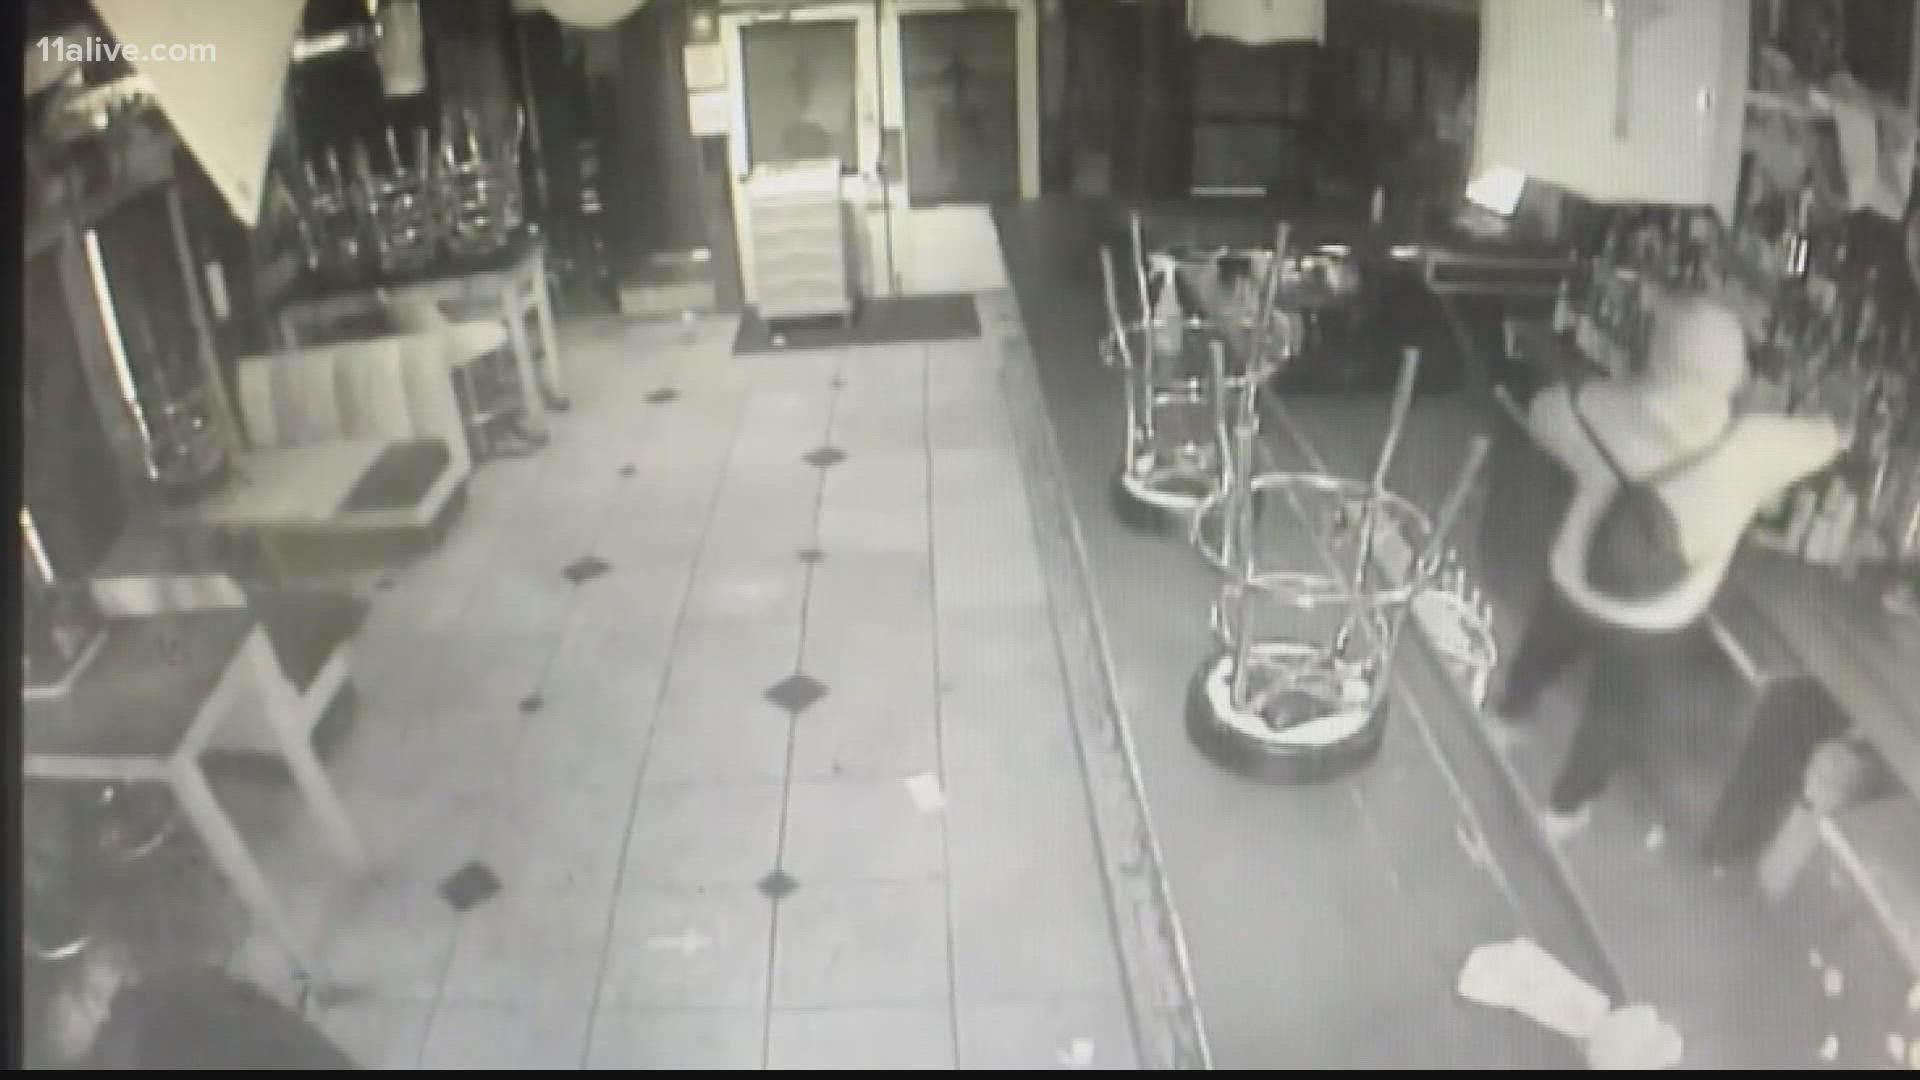 A string of brazen break-ins took place at the bar called Sister Louisa's Church.